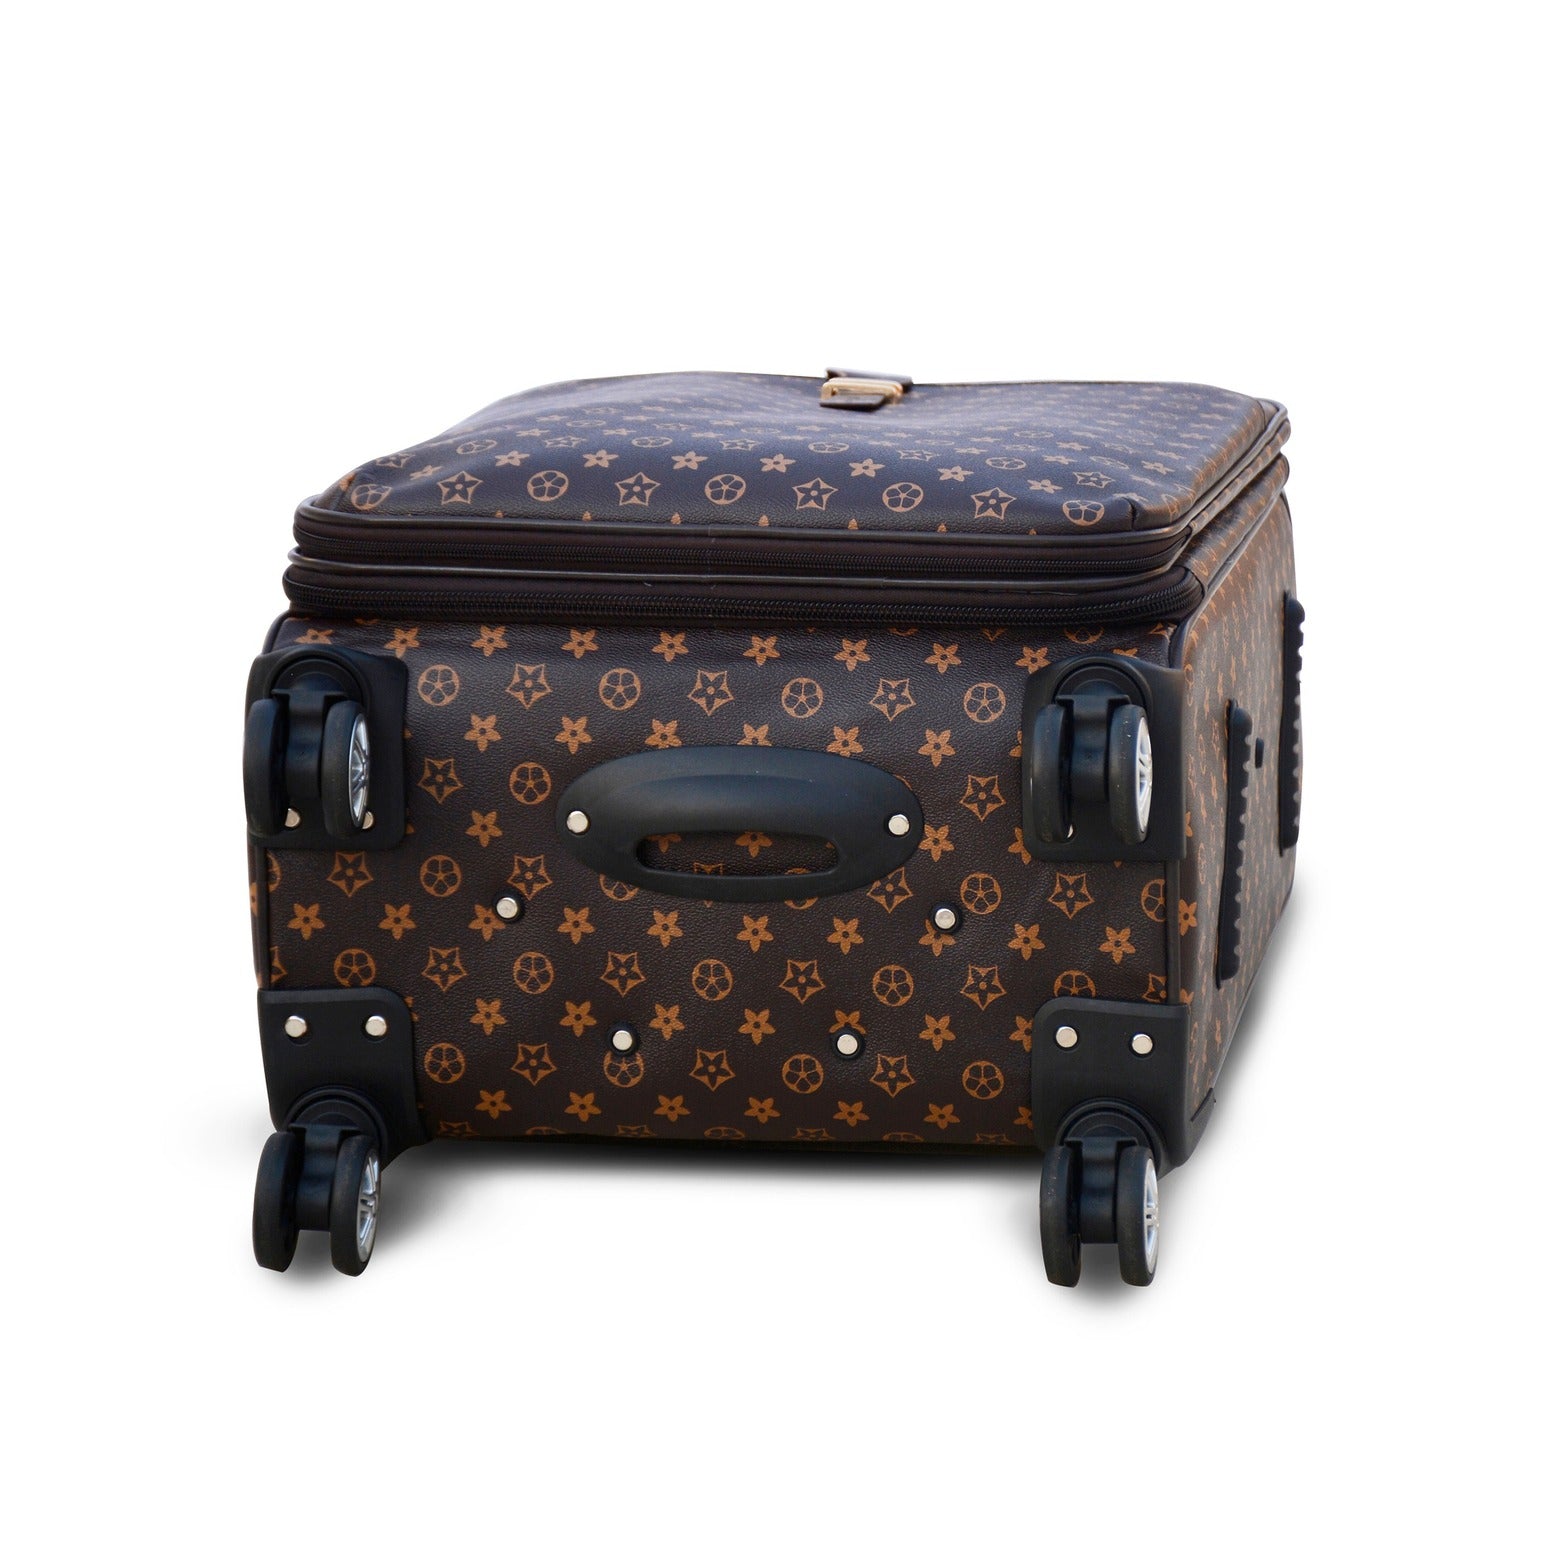 24" Brown Colour LVR PU Leather Luggage Lightweight Trolley Bag with Spinner Wheel